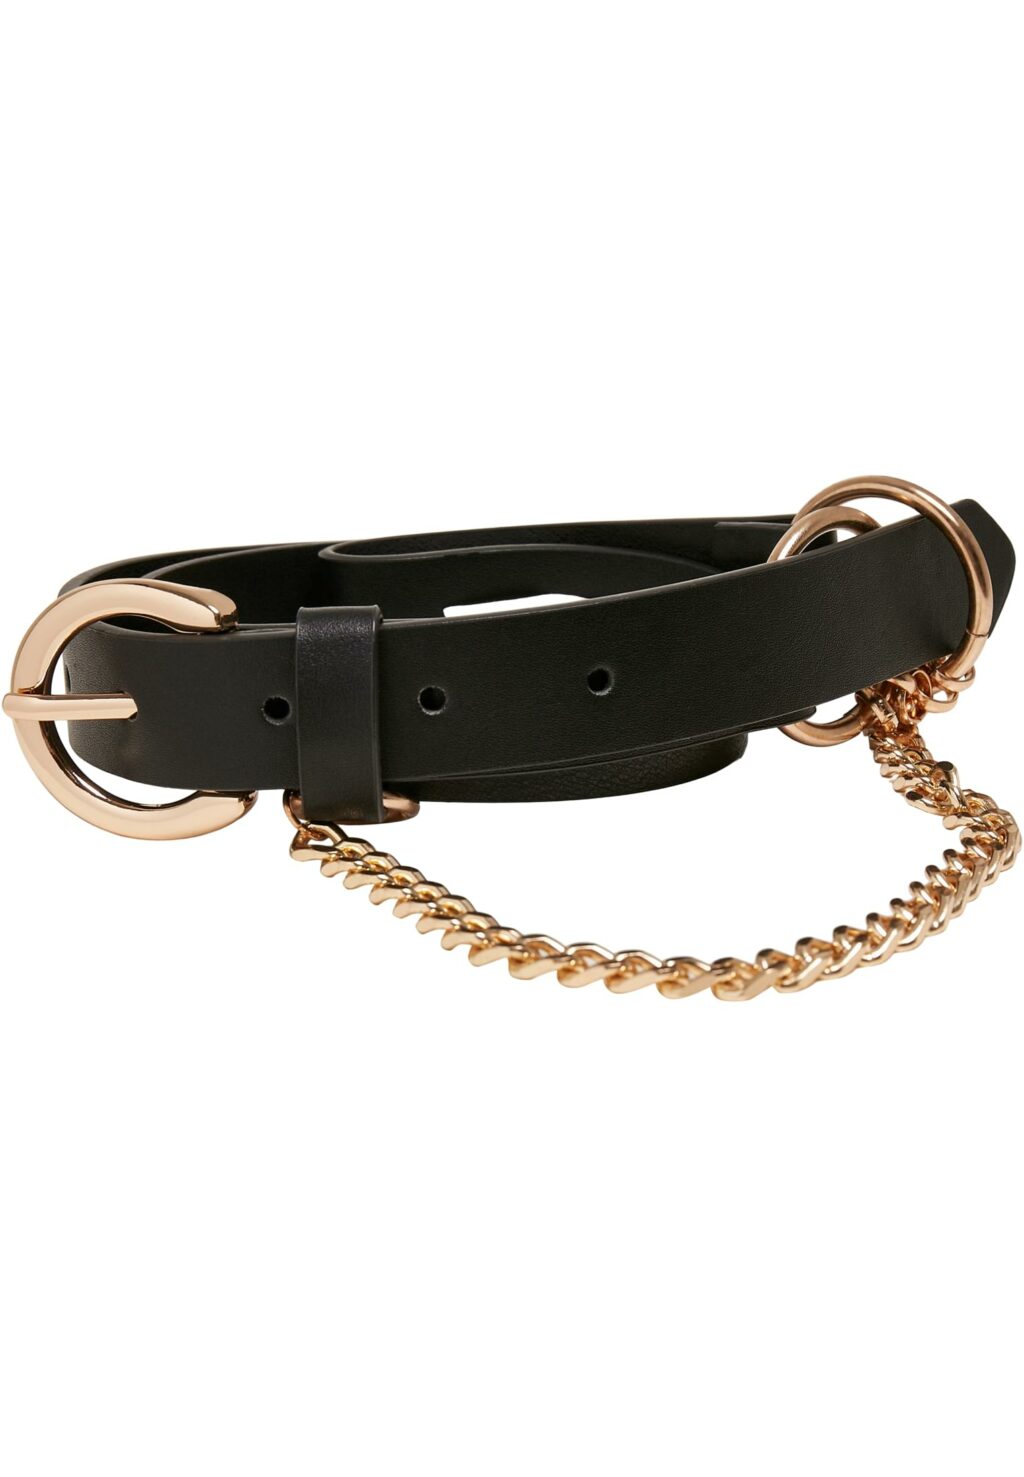 Synthetic Leather Belt With Chain black/gold TB5134